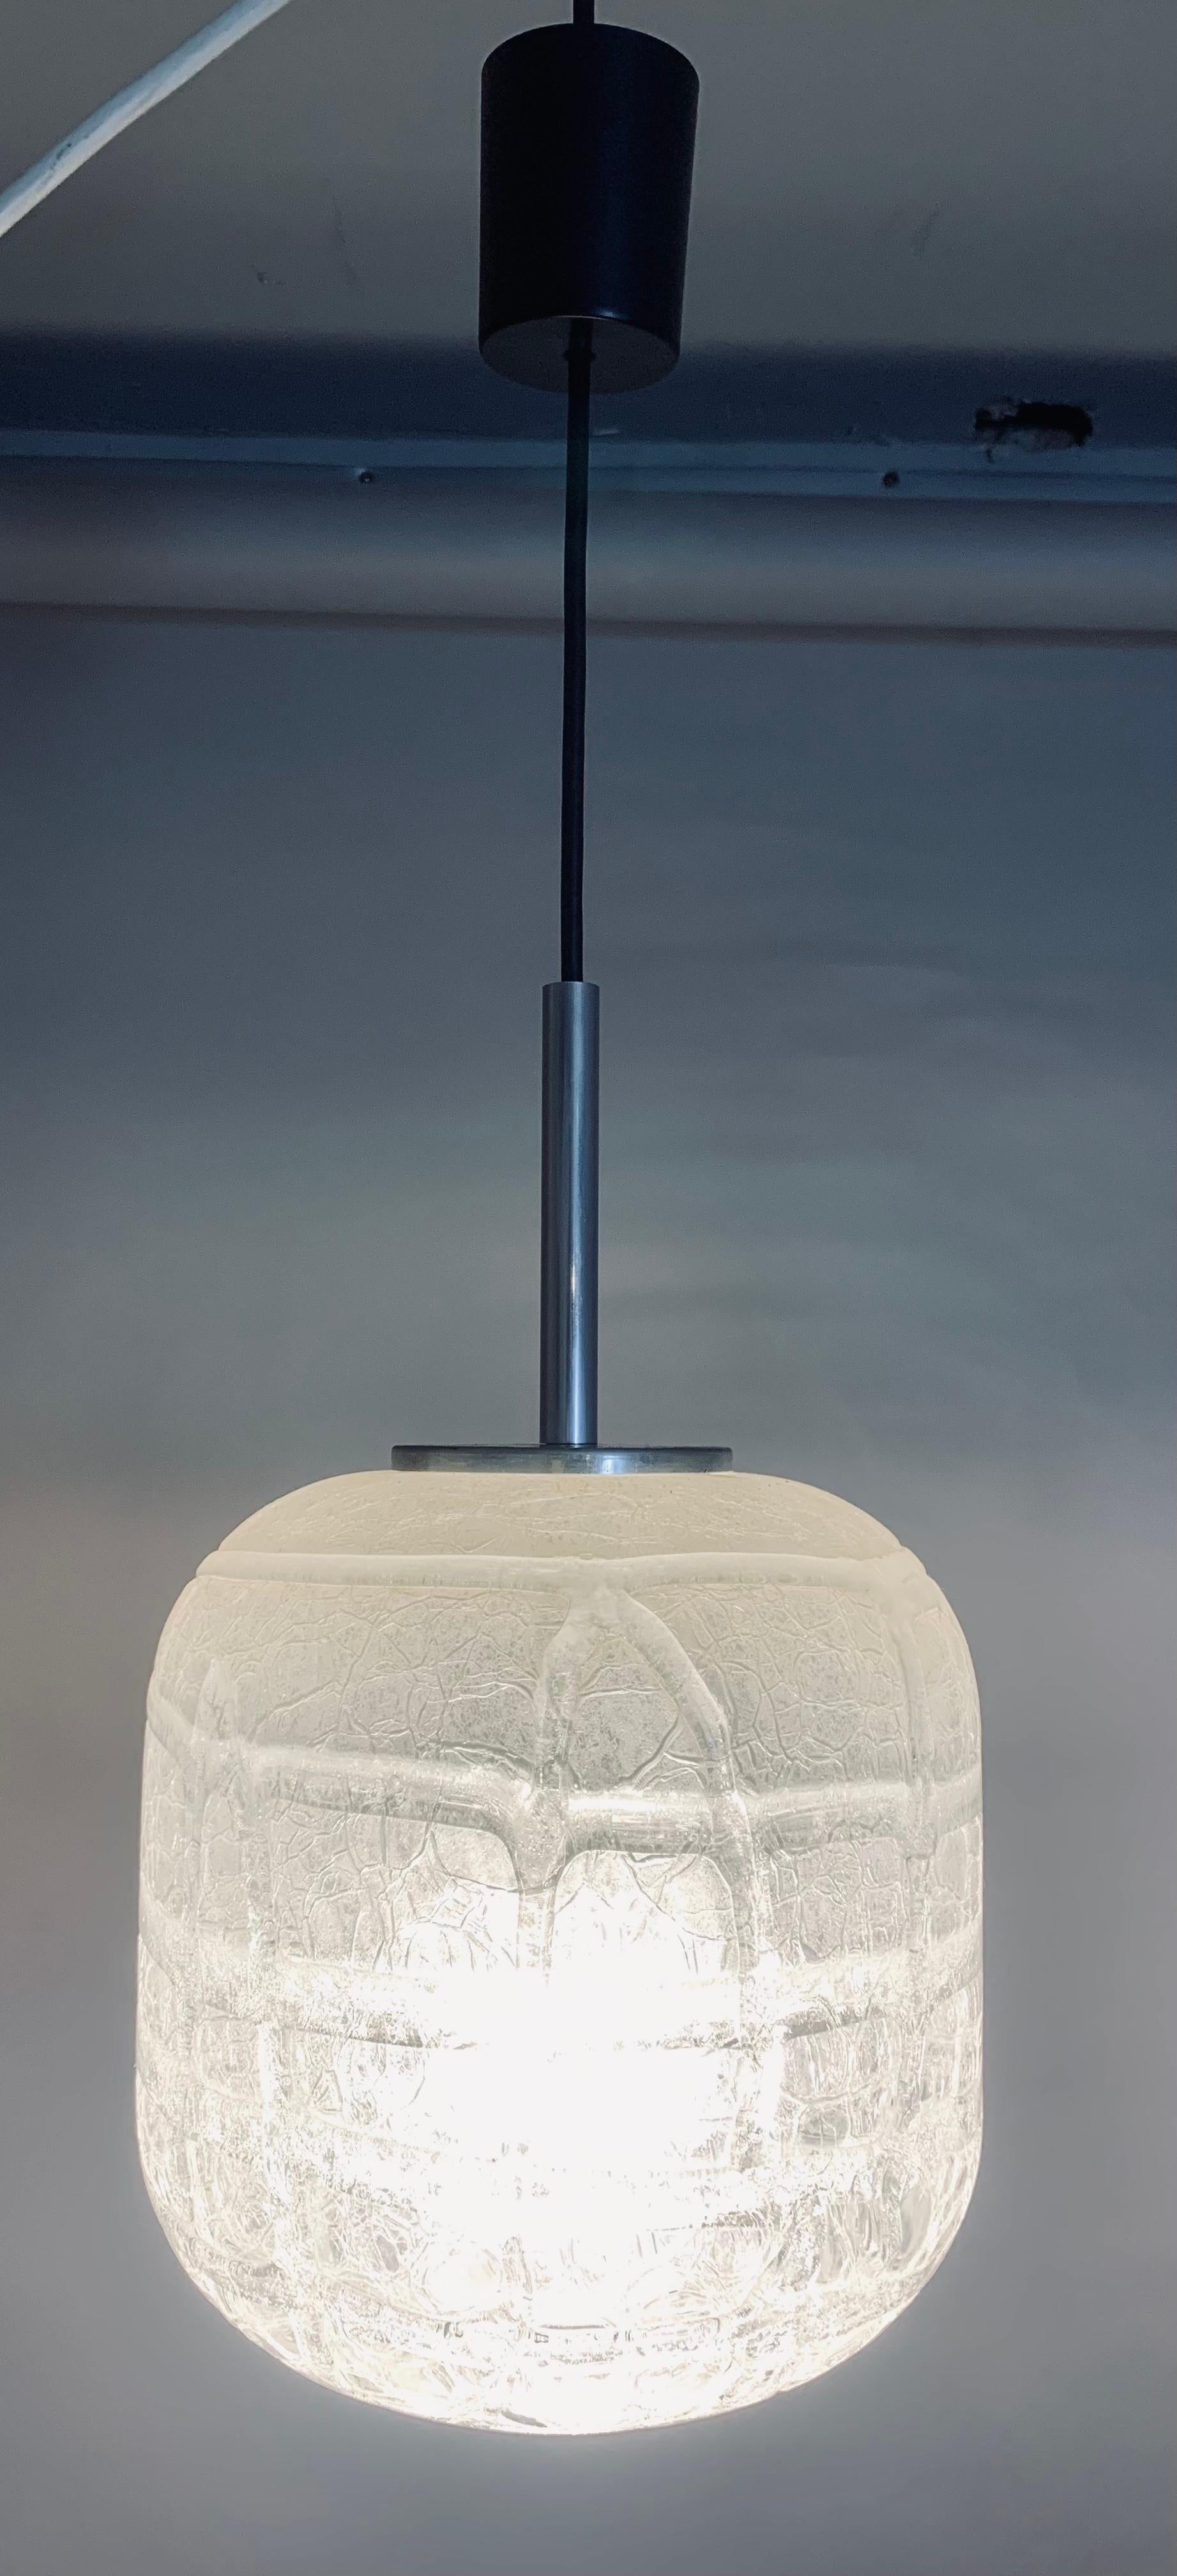 A small but perfectly formed crackled iced-glass cylindrical pendant hanging light made in the 1970s by Doria Leuchten in Germany. The shade hangs from a black flex with a matching ceiling cup which hides the wires where they connect to the ceiling.